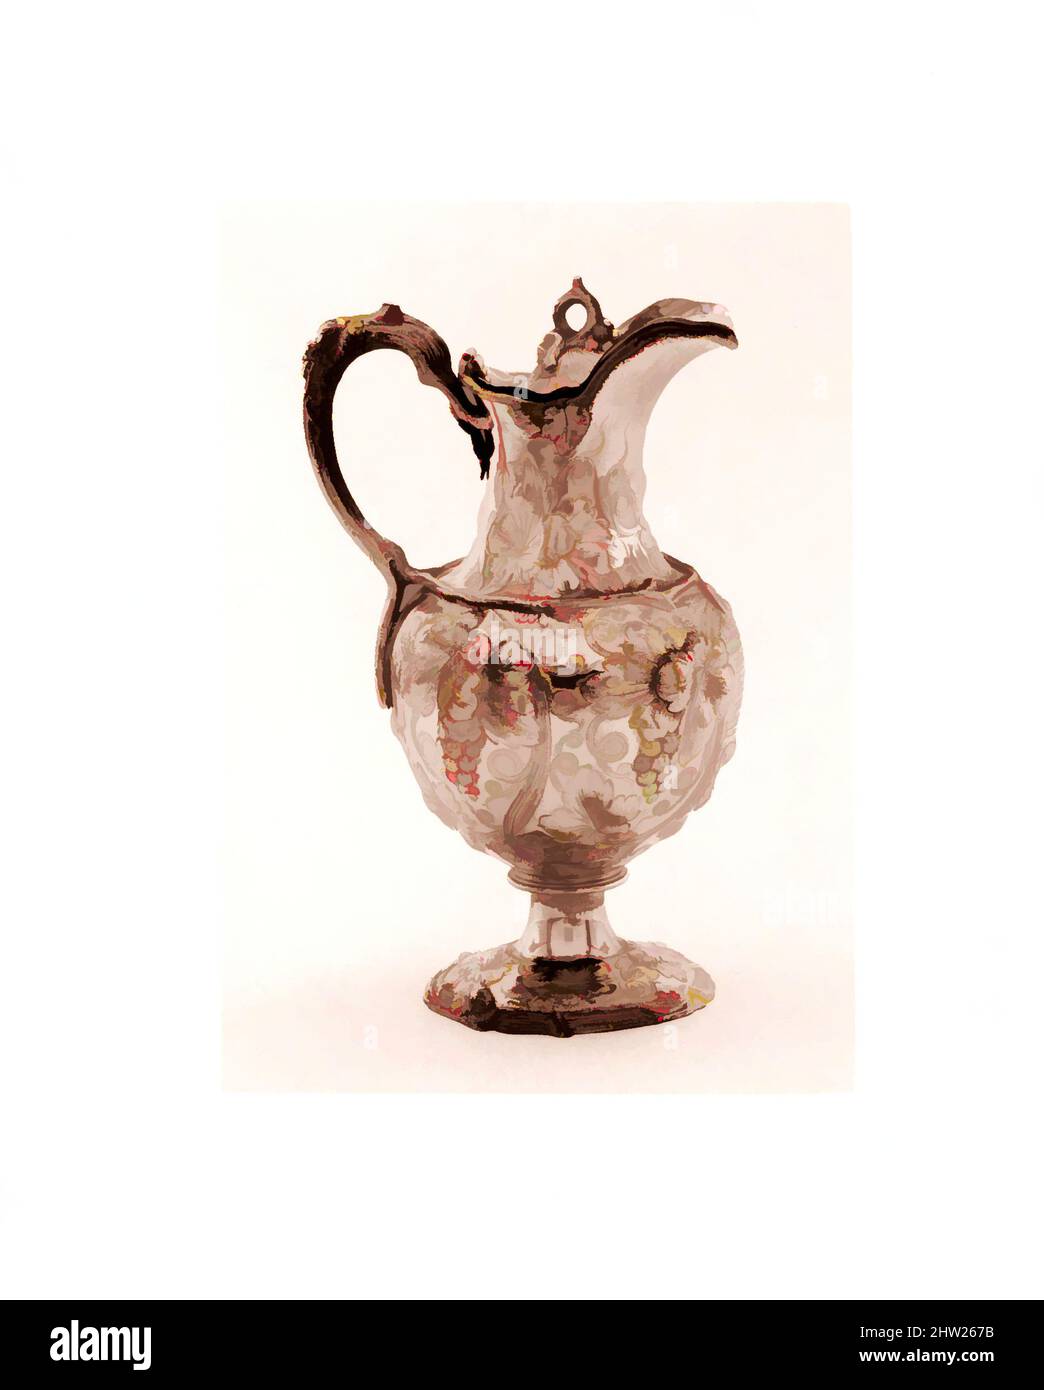 Art inspired by Milk Pot, 1850, Made in New York, New York, United States, American, Silver, 8 5/16 x 5 1/16 x 4 3/16 in. (21.1 x 12.8 x 10.6 cm); 15 oz. 16 dwt. (491.6 g), Silver, John C. Moore (ca. 1802–1874), In 1850, Marshall Lefferts, president of the New York and New England and, Classic works modernized by Artotop with a splash of modernity. Shapes, color and value, eye-catching visual impact on art. Emotions through freedom of artworks in a contemporary way. A timeless message pursuing a wildly creative new direction. Artists turning to the digital medium and creating the Artotop NFT Stock Photo